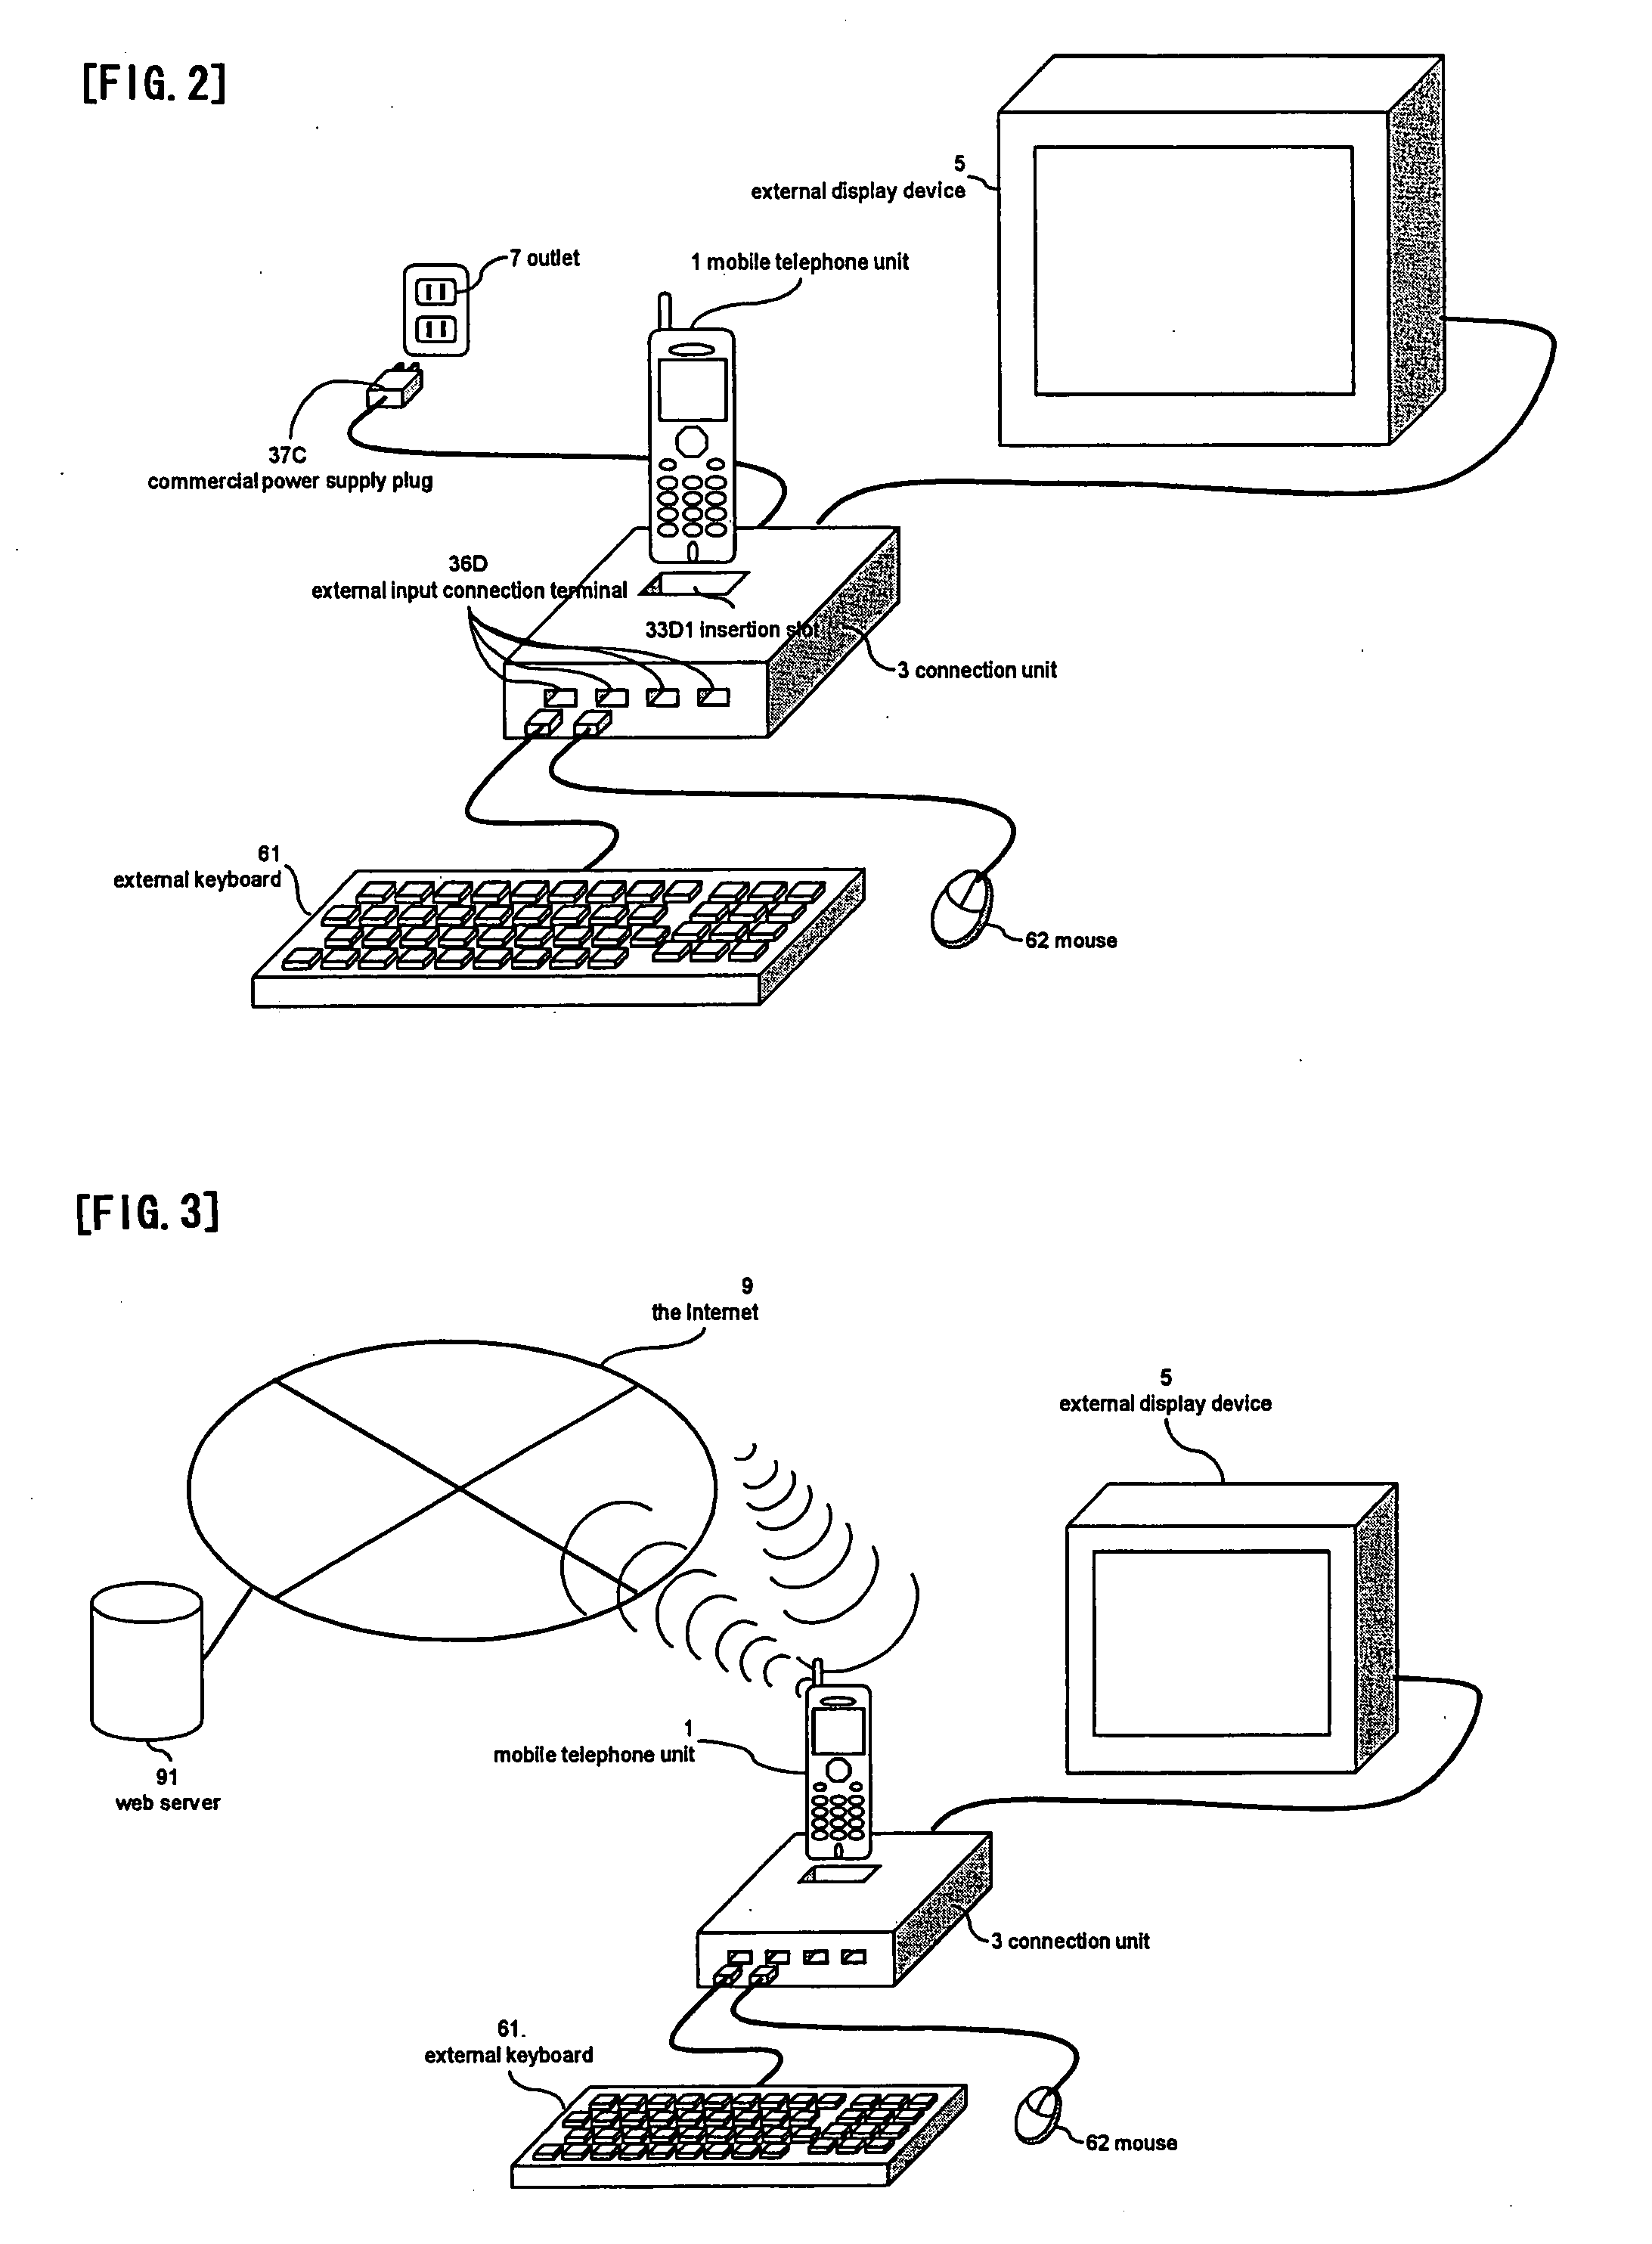 Mobile Information Communication Apparatus, Connection Unit for Mobile Information Communication Apparatus, and External Input/Output Unit for Mobile Information Communication Apparatus